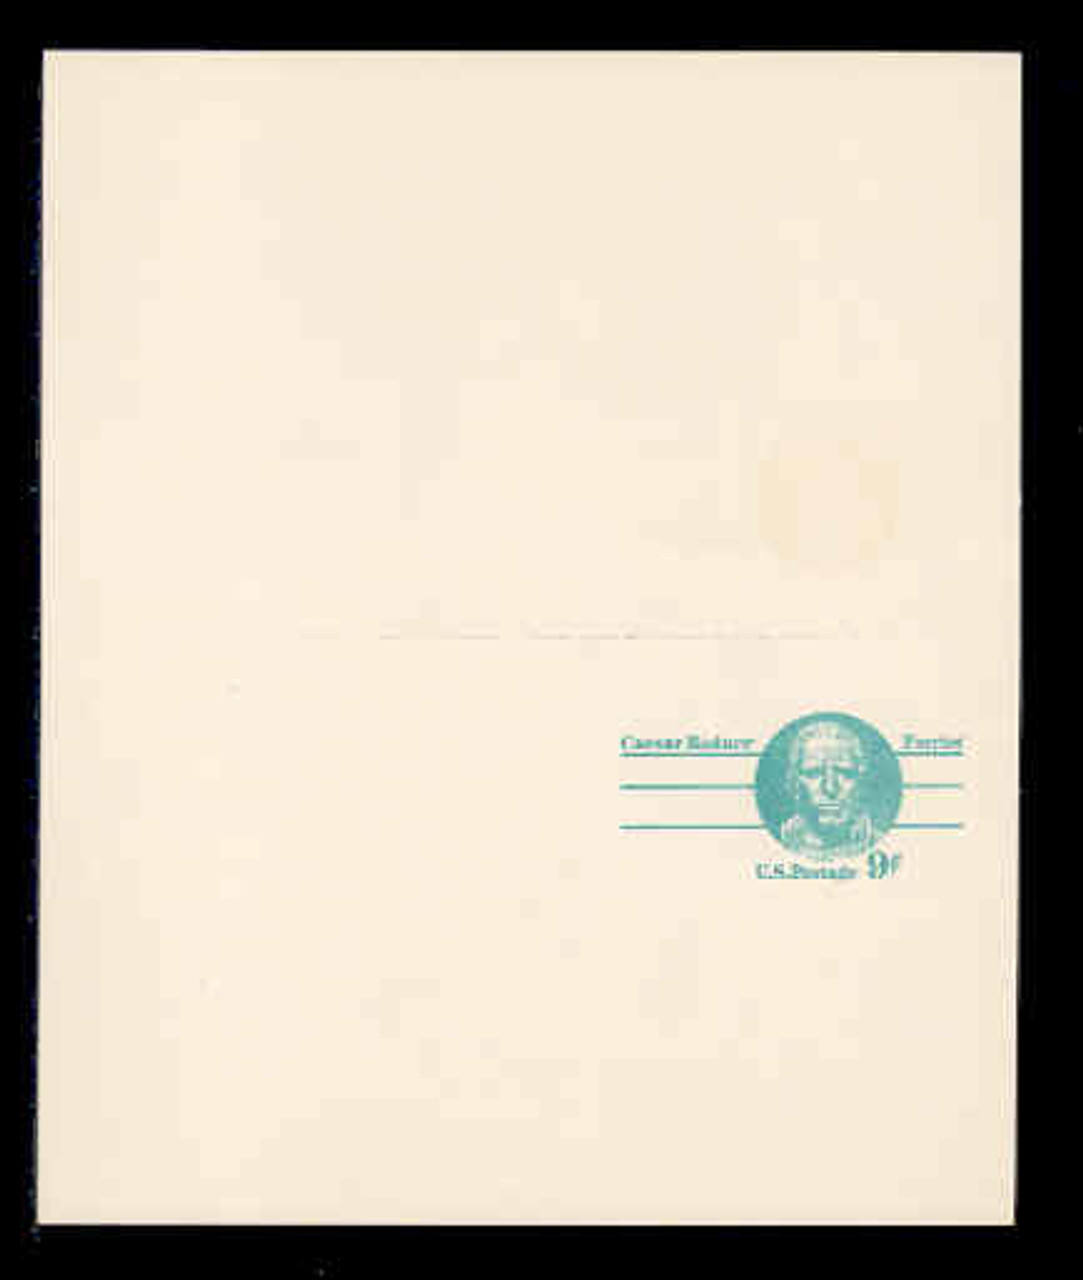 USA Scott # UY 27, 1976 9c Caesar Rodney - Patriot Series - Mint Message-Reply Card, SMOOTH, DULL PAPER - UNFOLDED